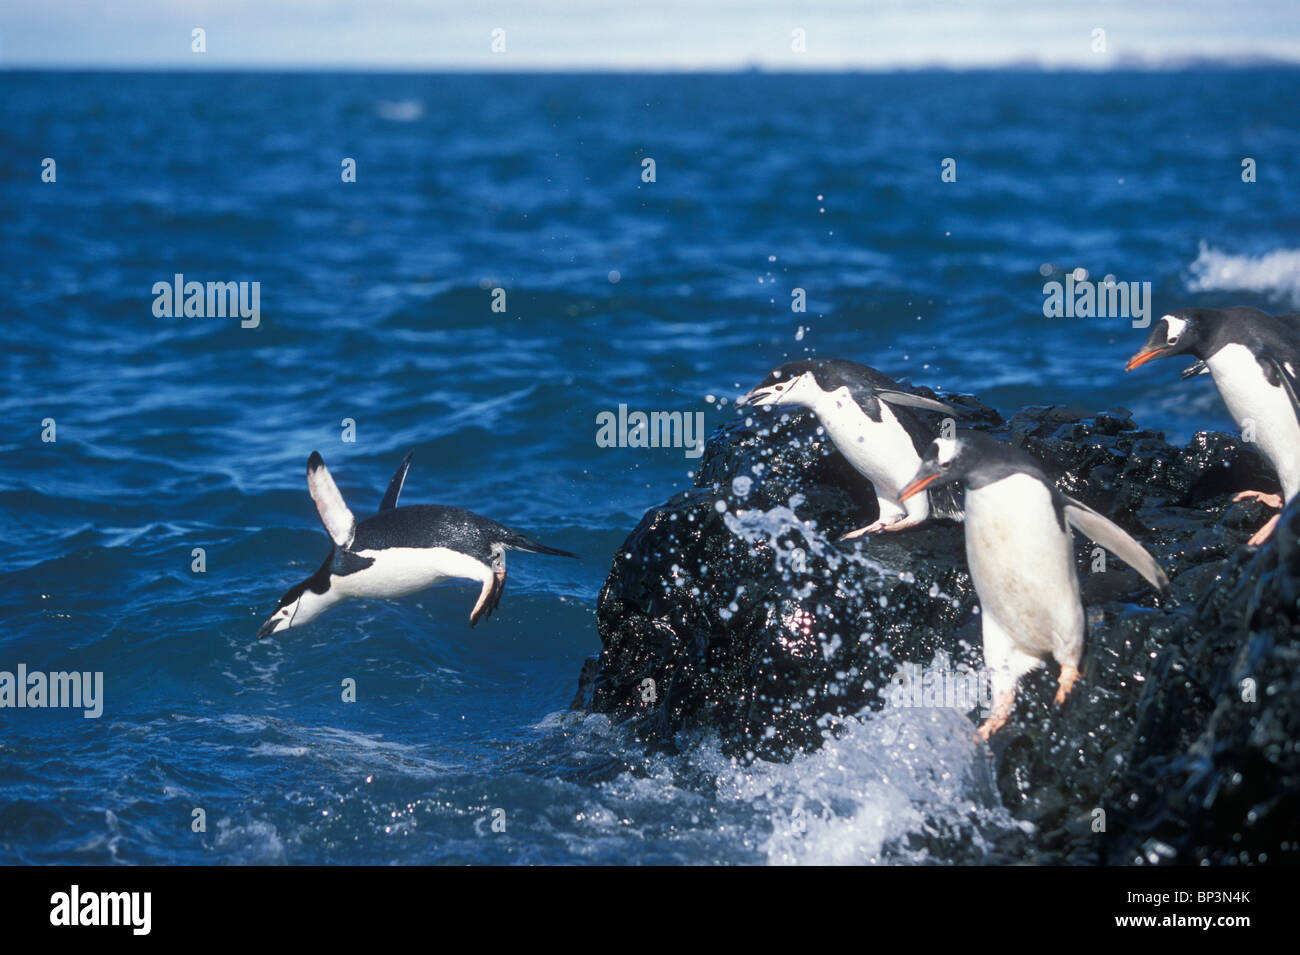 Antarctica, Livingston Island, Hannah Point, Chinstrap and Gentoo penguins leap from rocks into wave at ocean's edge Stock Photo